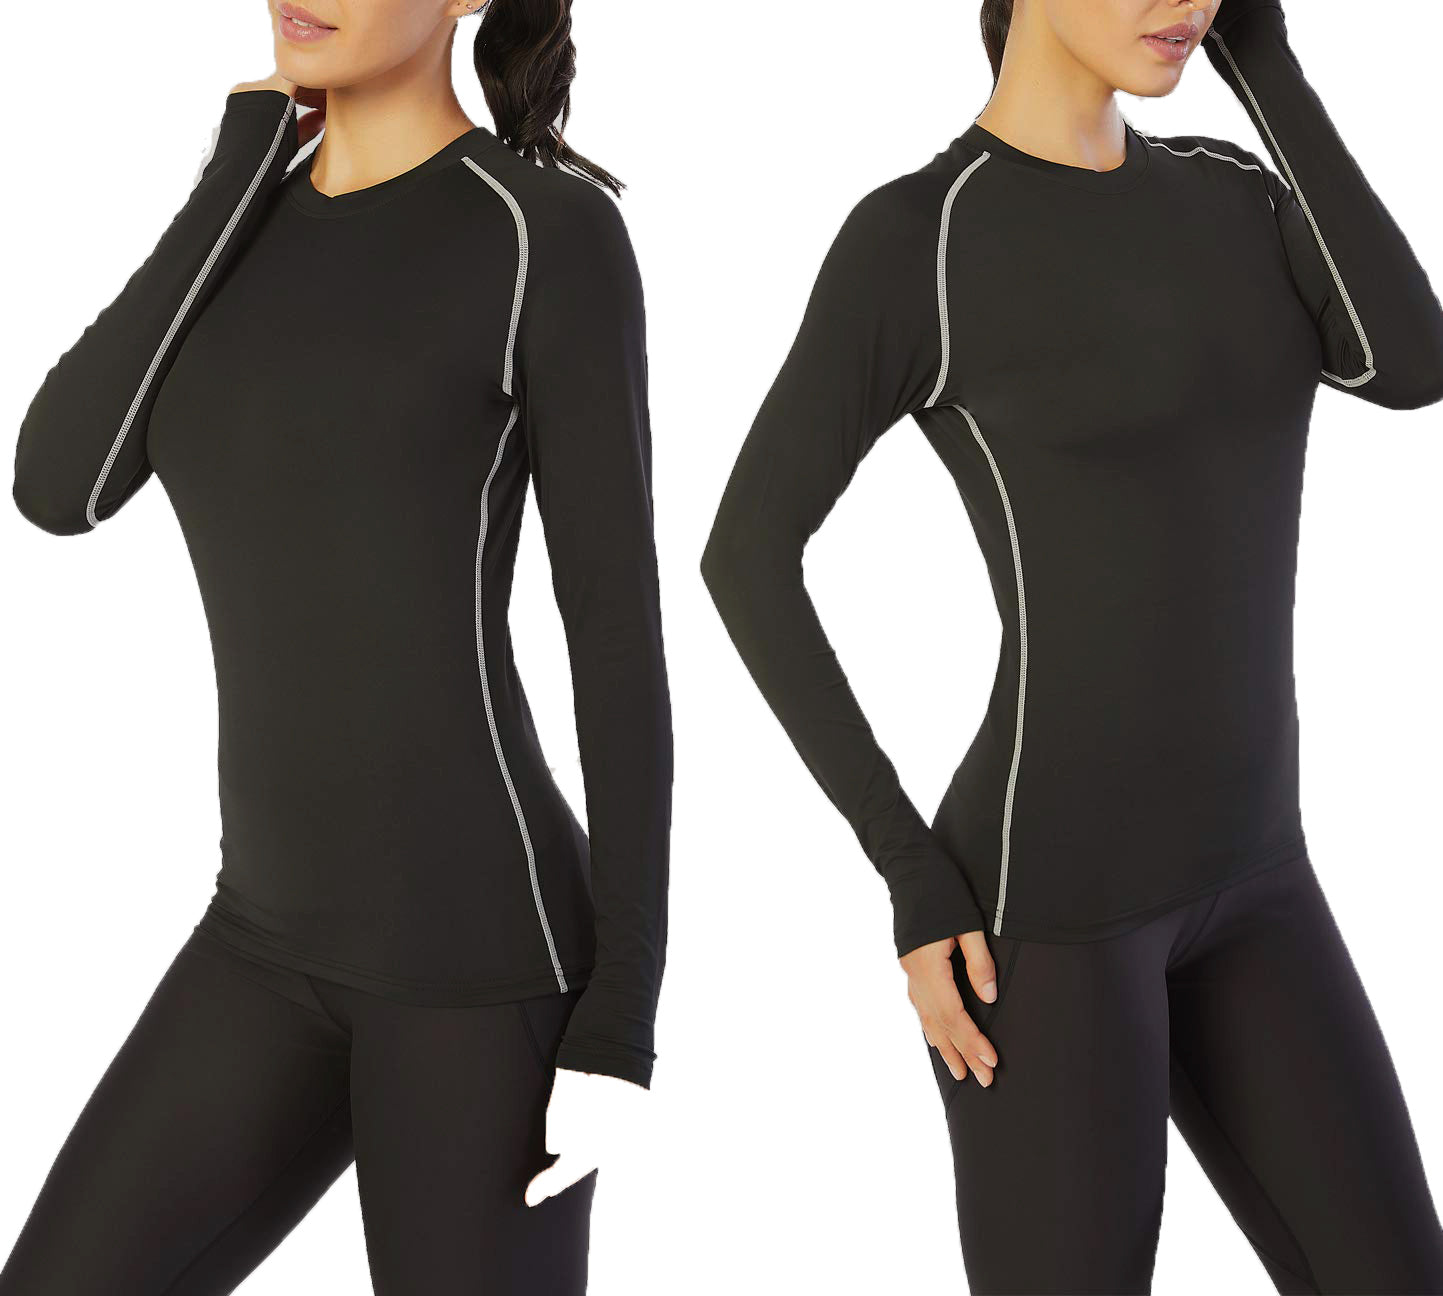 3 Packs Women's Long Sleeve Shirts Dry Fit Compression Baselayer Tops for Sports Yoga LANBAOSI